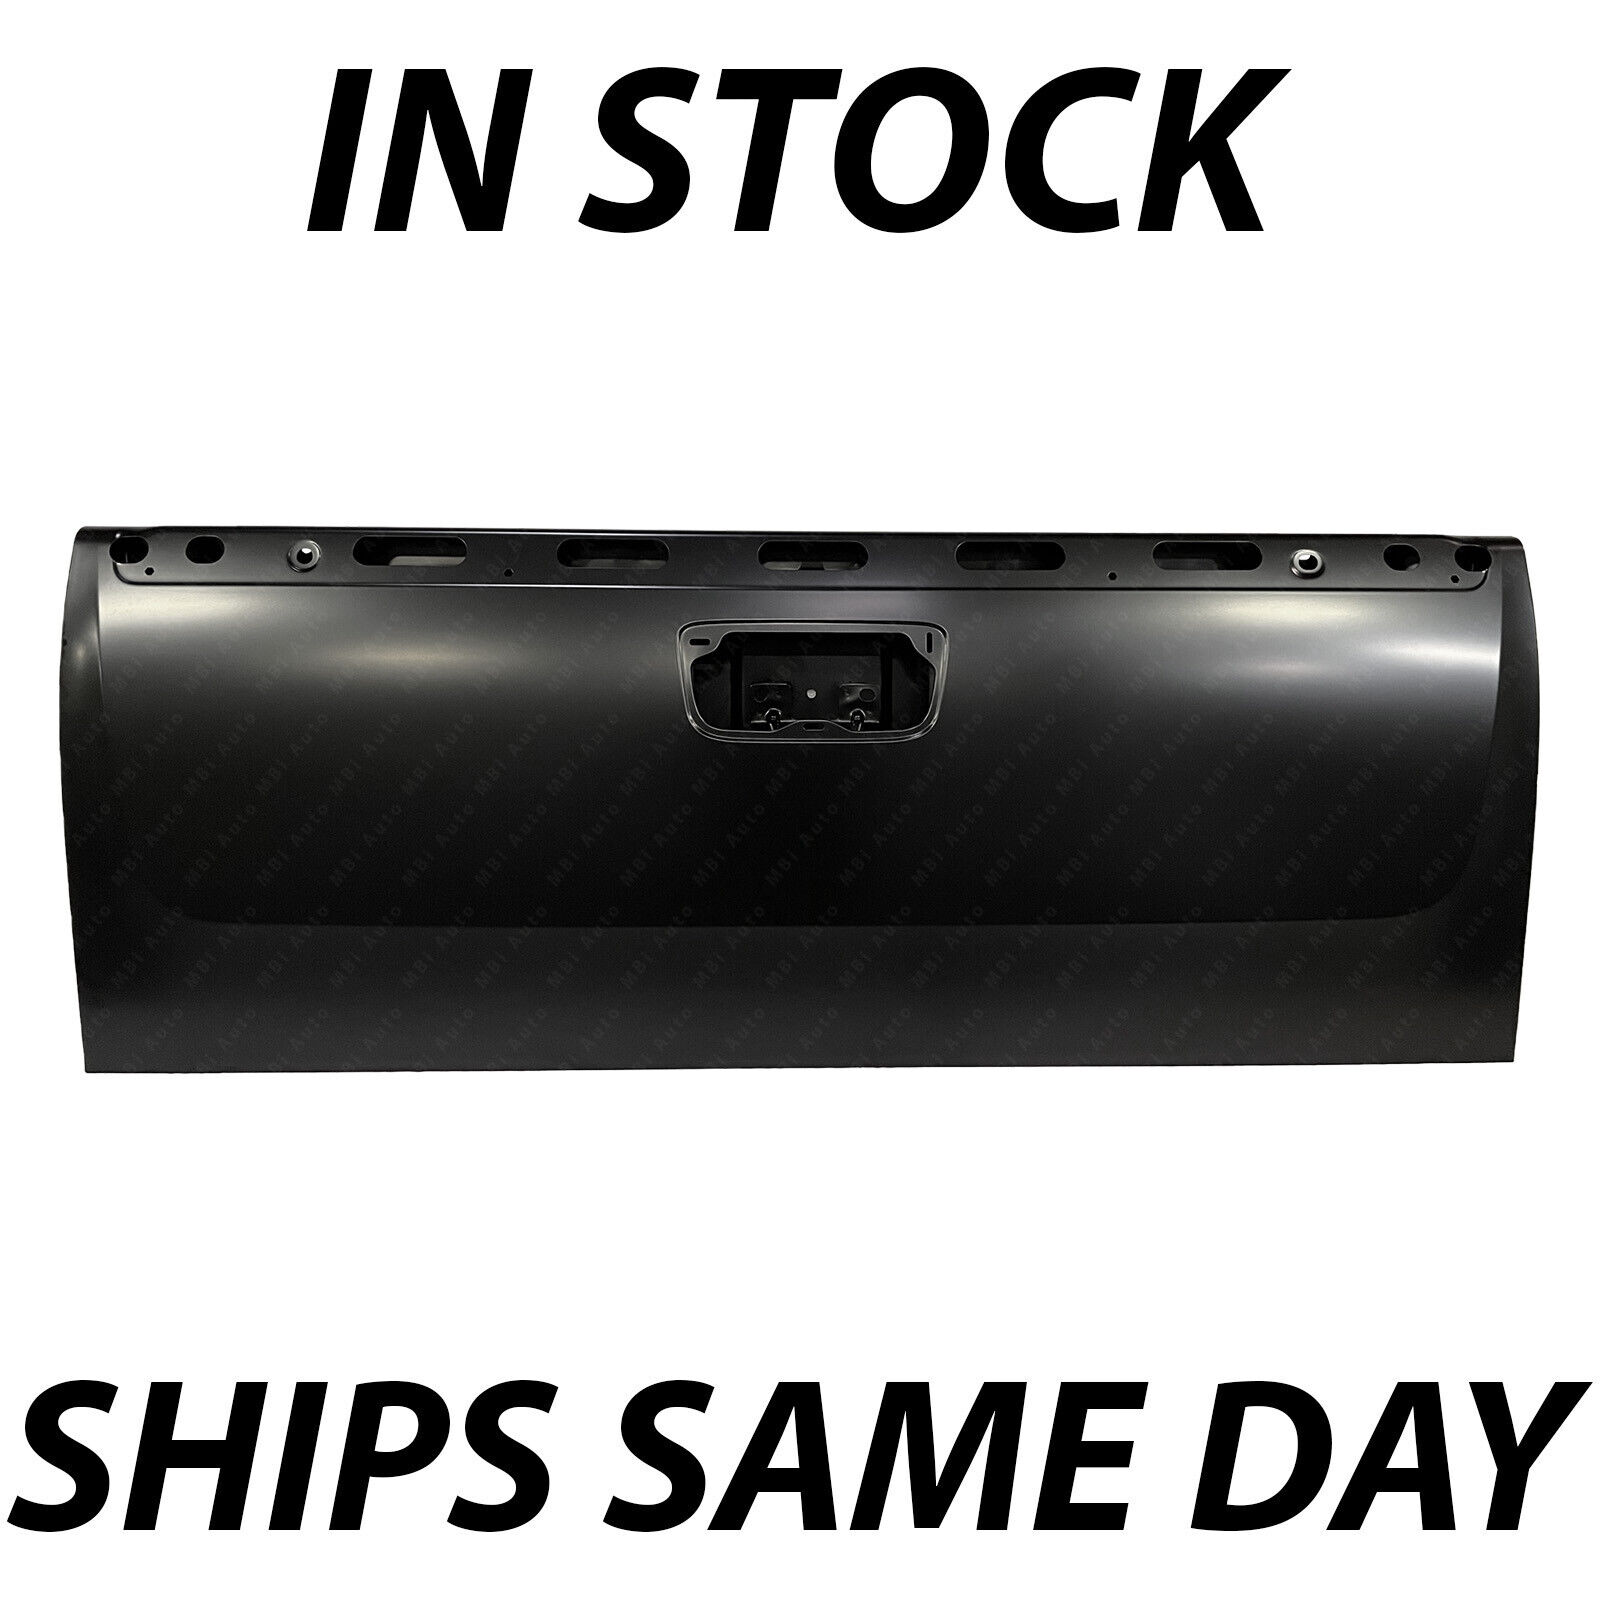 NEW Primered - Tailgate for 07-13 Chevy Silverado GMC Sierra Truck w/ Easy Close